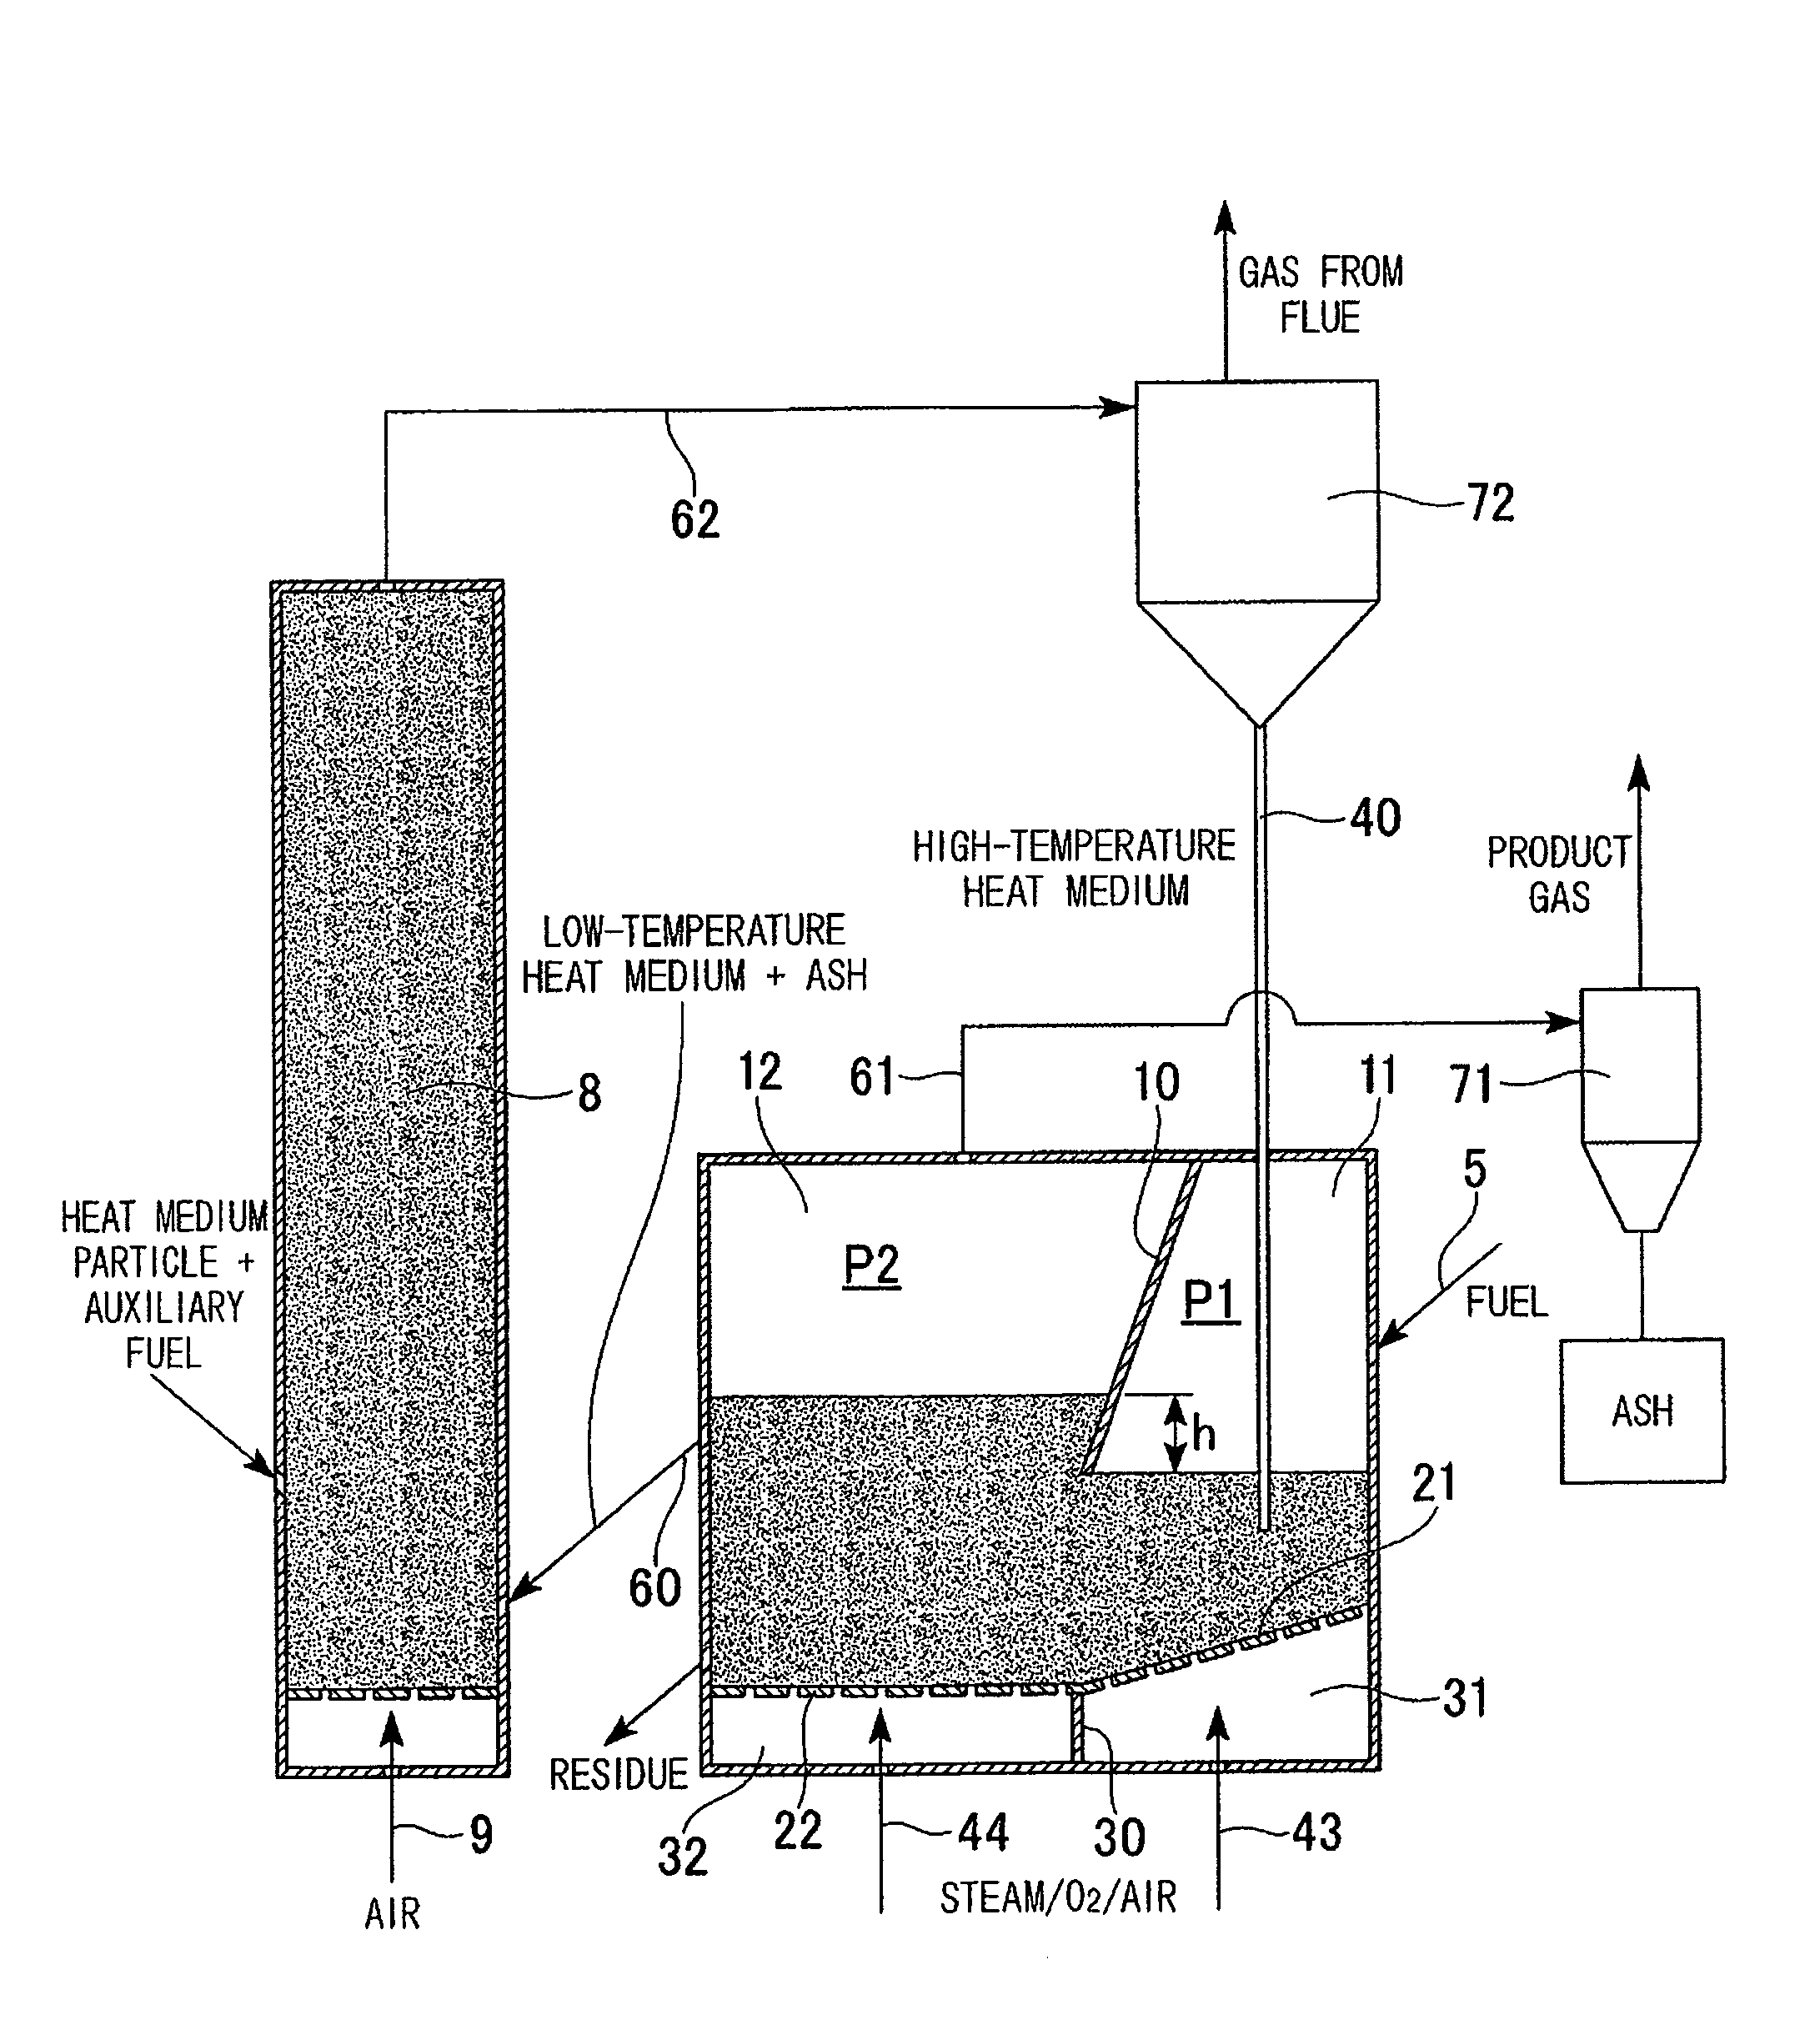 Decoupled fluidized bed gasifying method and gasifying apparatus of solid fuel